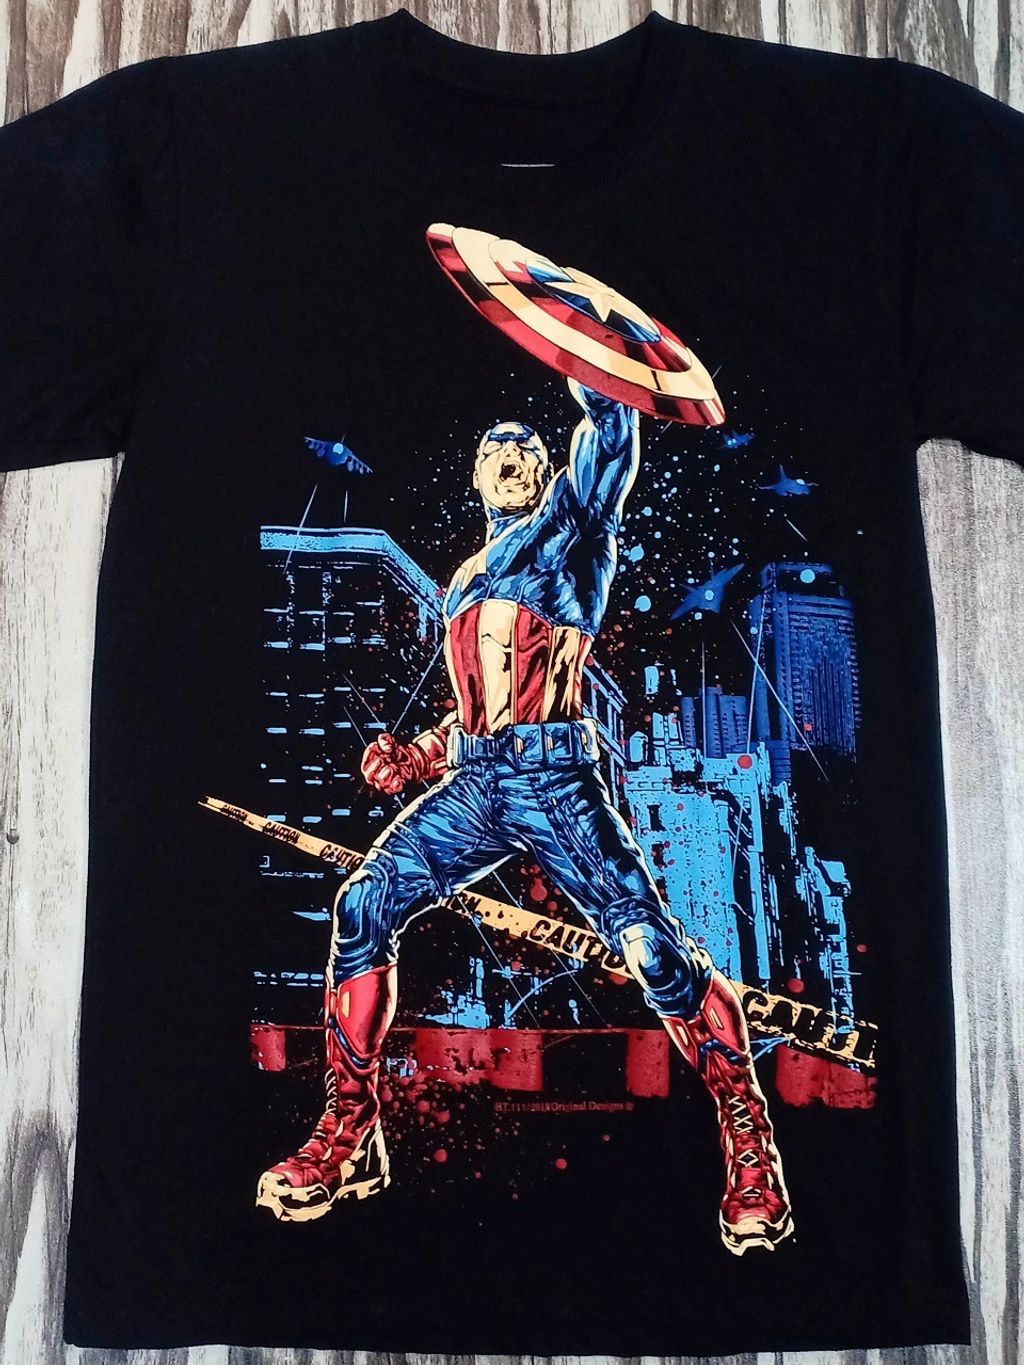 NEW SPEED COLLECTABLE HERO BLACK BT111 TIMBER PREMIUM HIGH STORE BLACK AVENGERS MOVIE STEVE SYSTEM MOAI – SCREEN QUALITY TIMBER MARVEL CAPTAIN COTTON TSHIRT TYPE EDITION ROGERS T-SHIRT GRADE SILK COLLECTABLE AMERICA